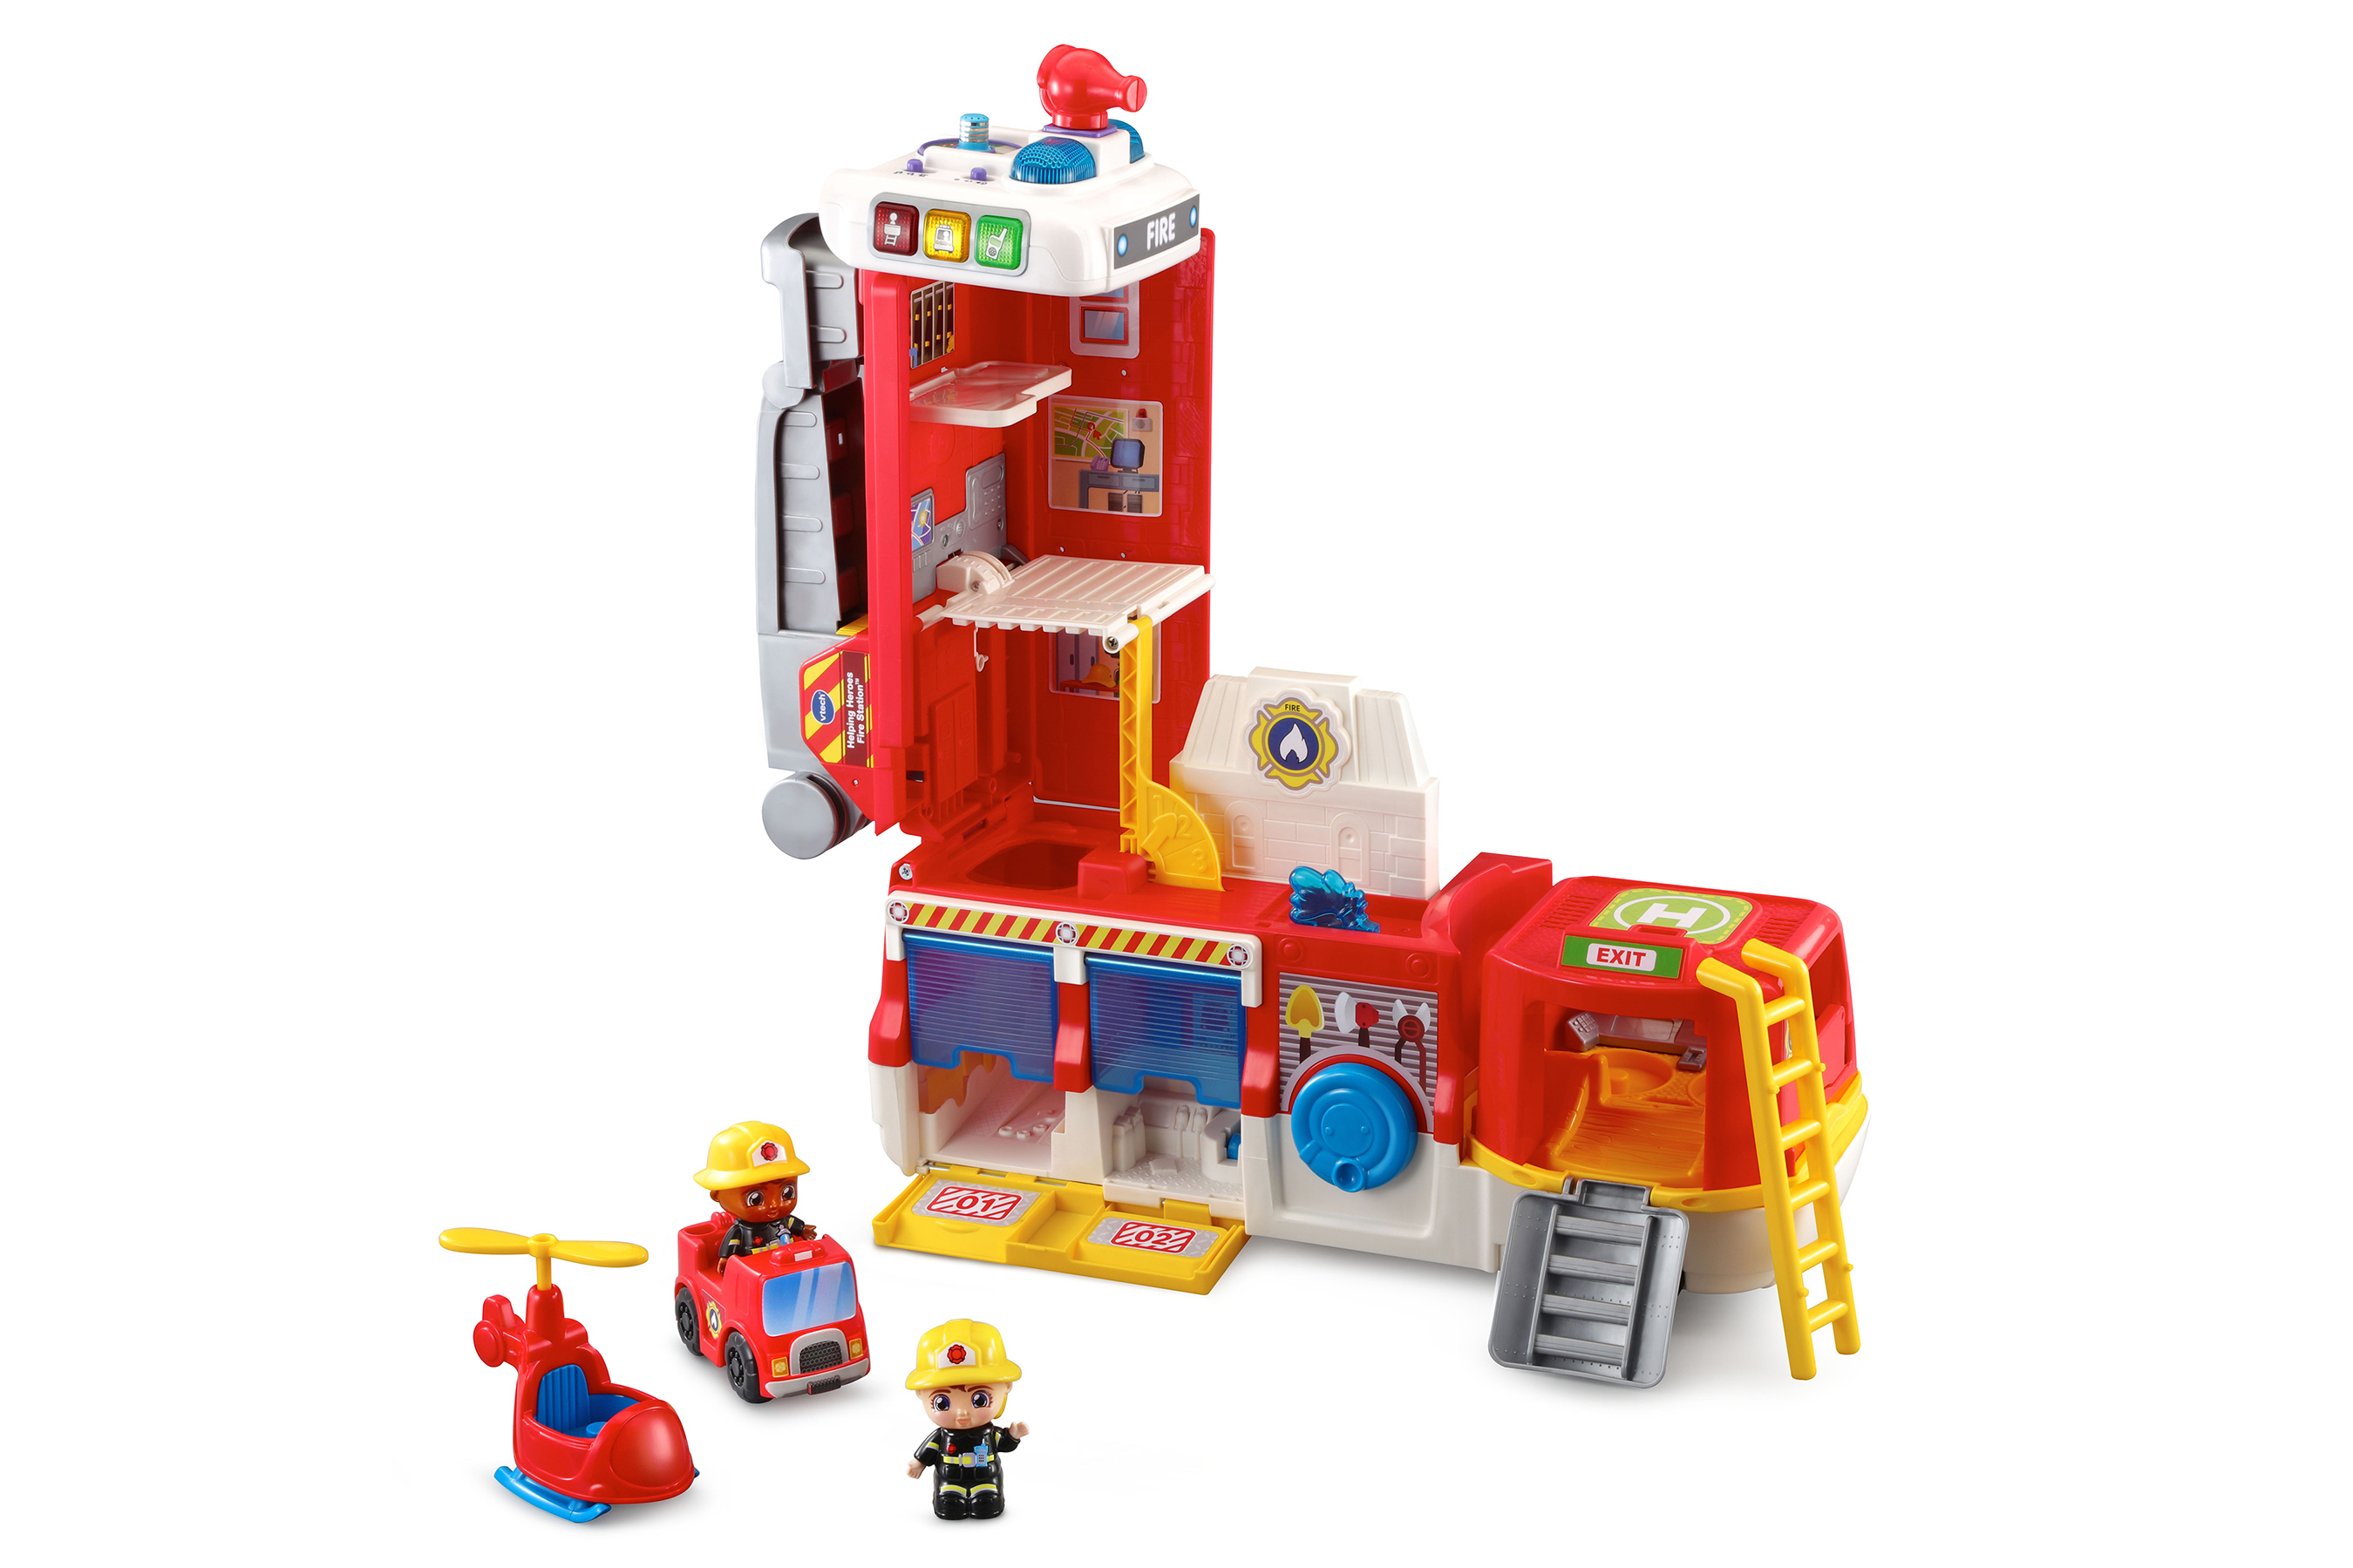 VTech Helping Heroes Fire Station toy set